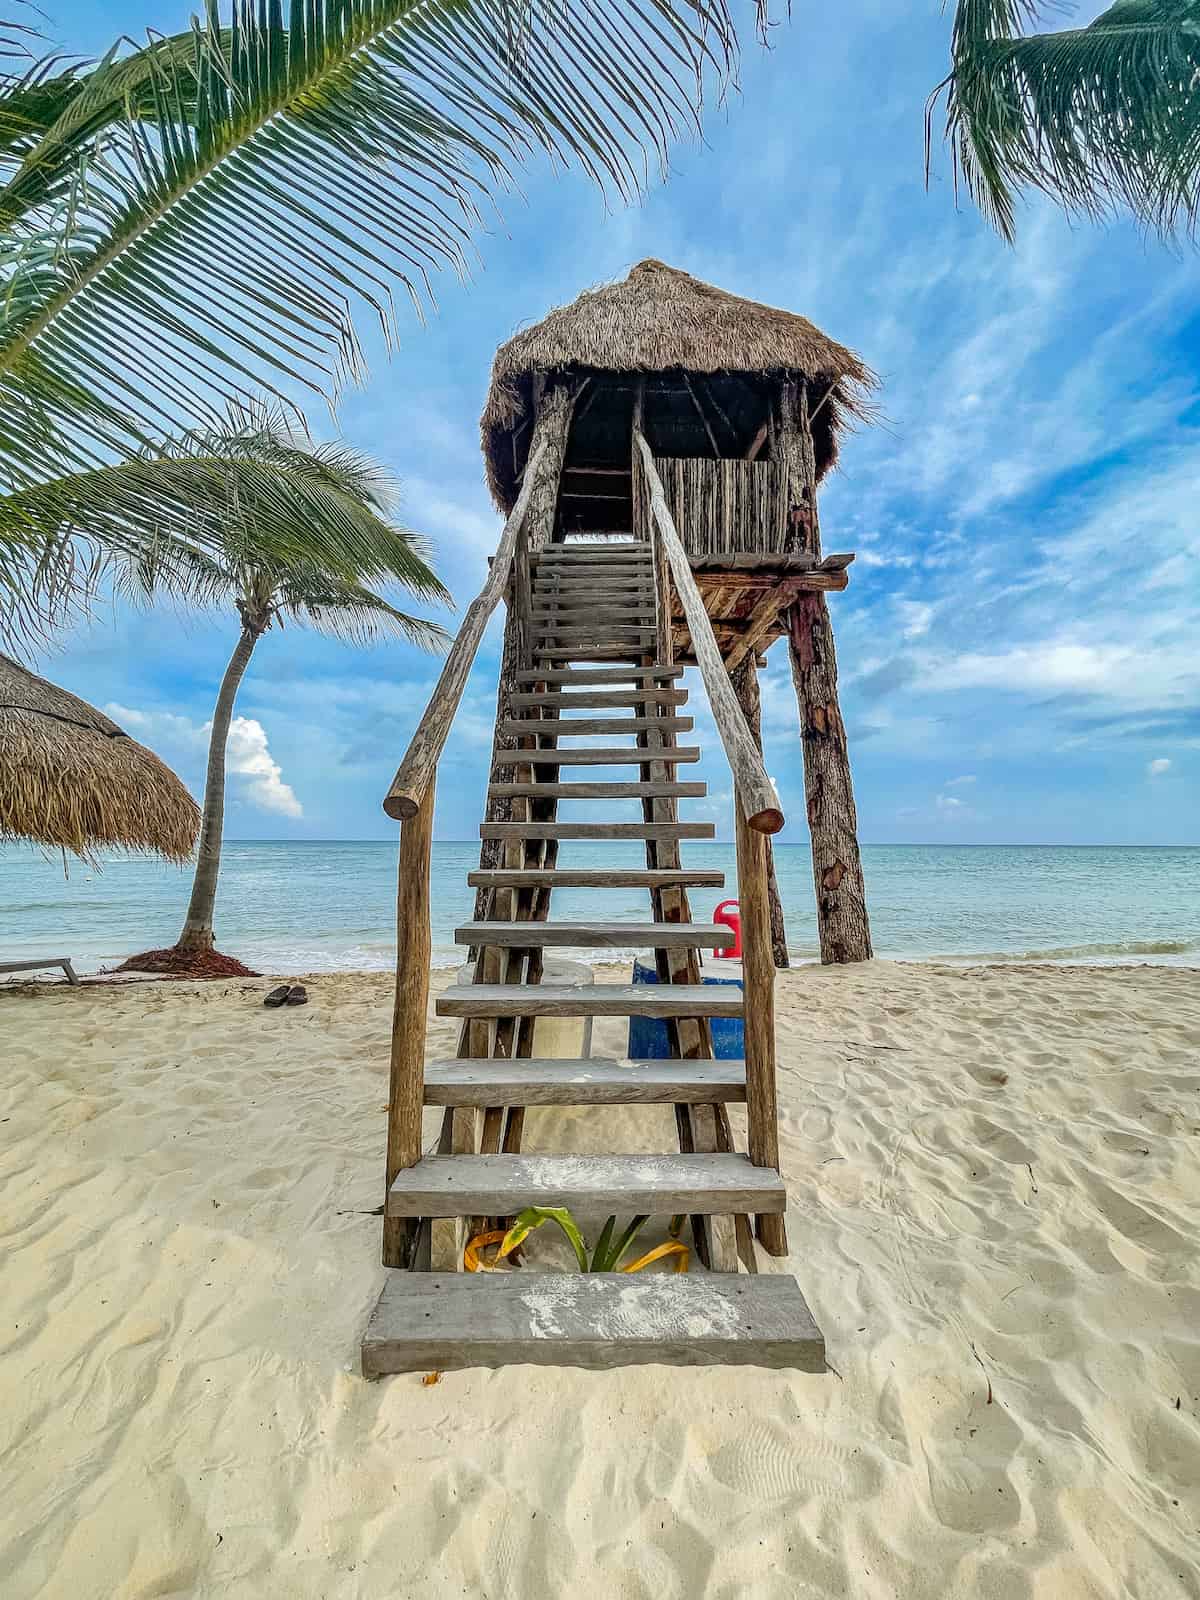 Lifeguard stand on beach in Mexico.